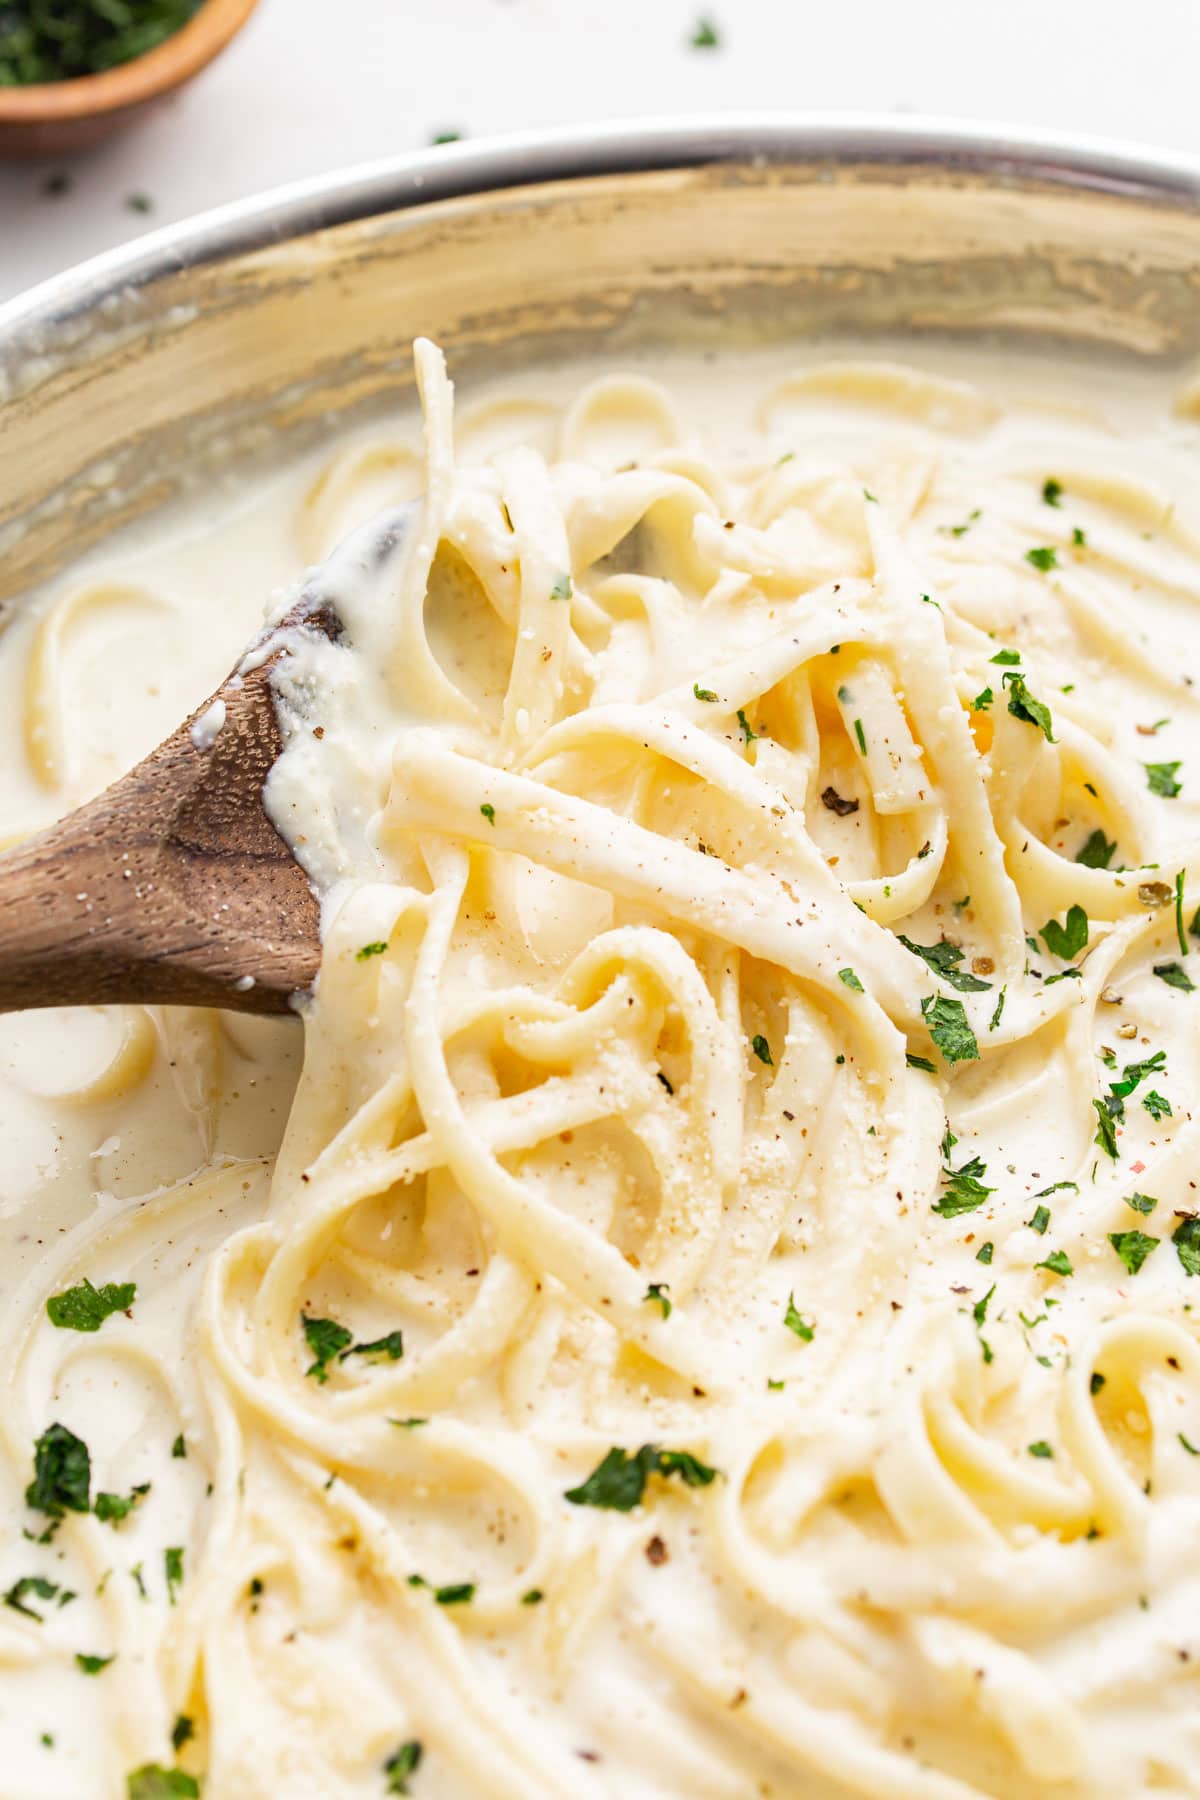 Fettucine pasta smothered in homemade Alfredo sauce and topped with fresh parsley.